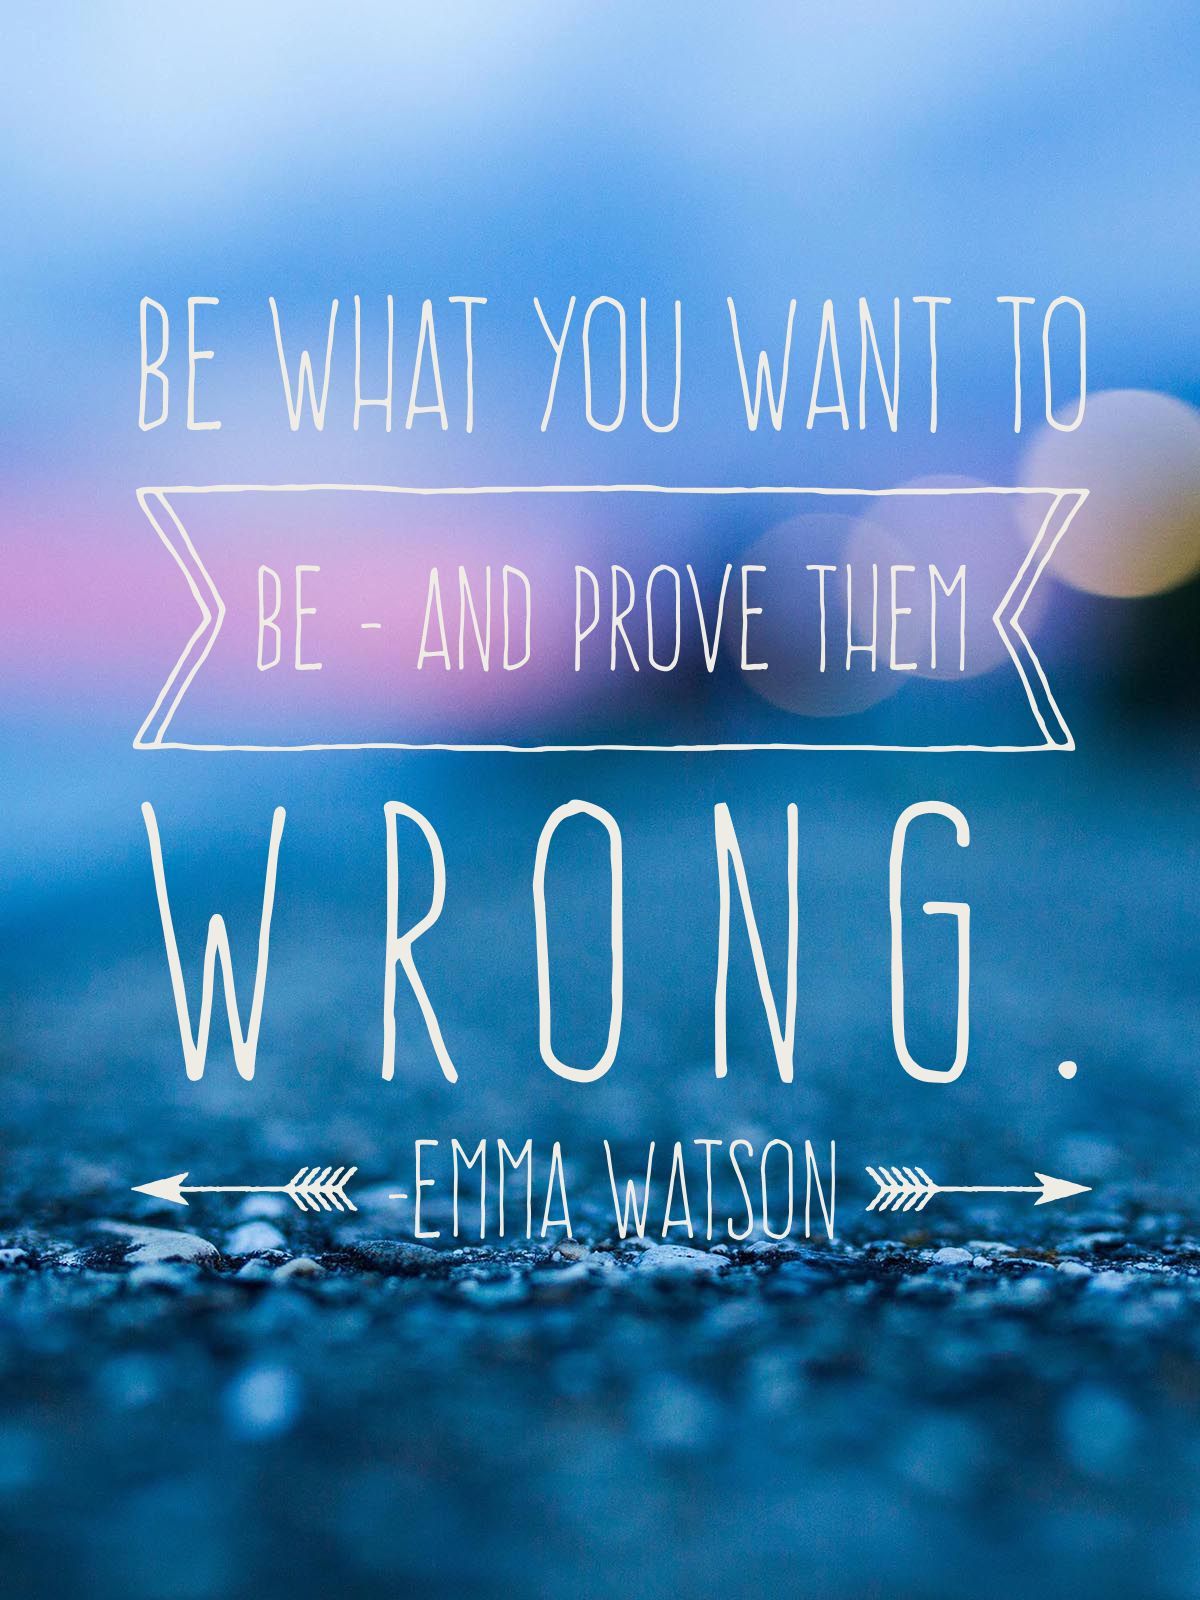 Be what you want to be prove them wrong. -Emma Watson. Emma watson quotes, Emma watson, Girl quotes